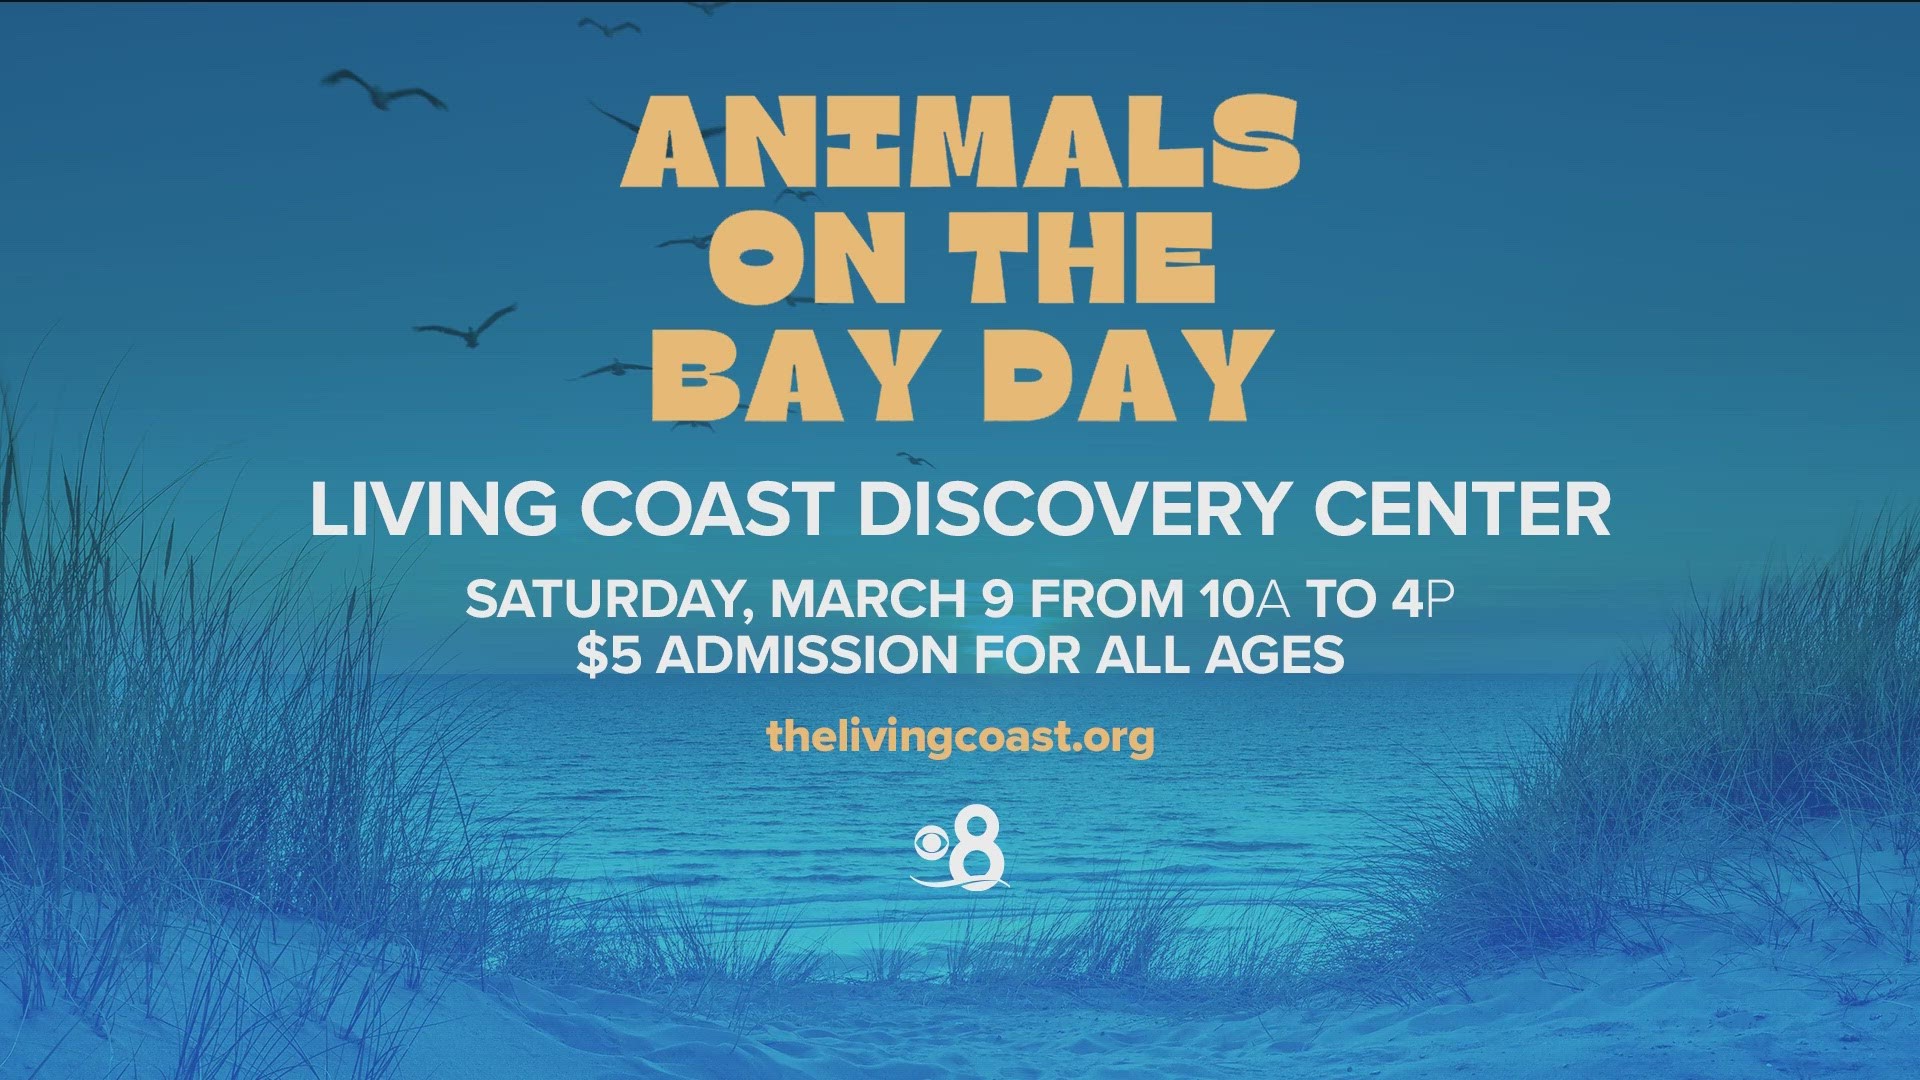 The Living Coast Discovery Center in Chula Vista is hosting a family-friendly event Saturday March 9 from 10 a.m. to 4 p.m. to educate guests on local wildlife.